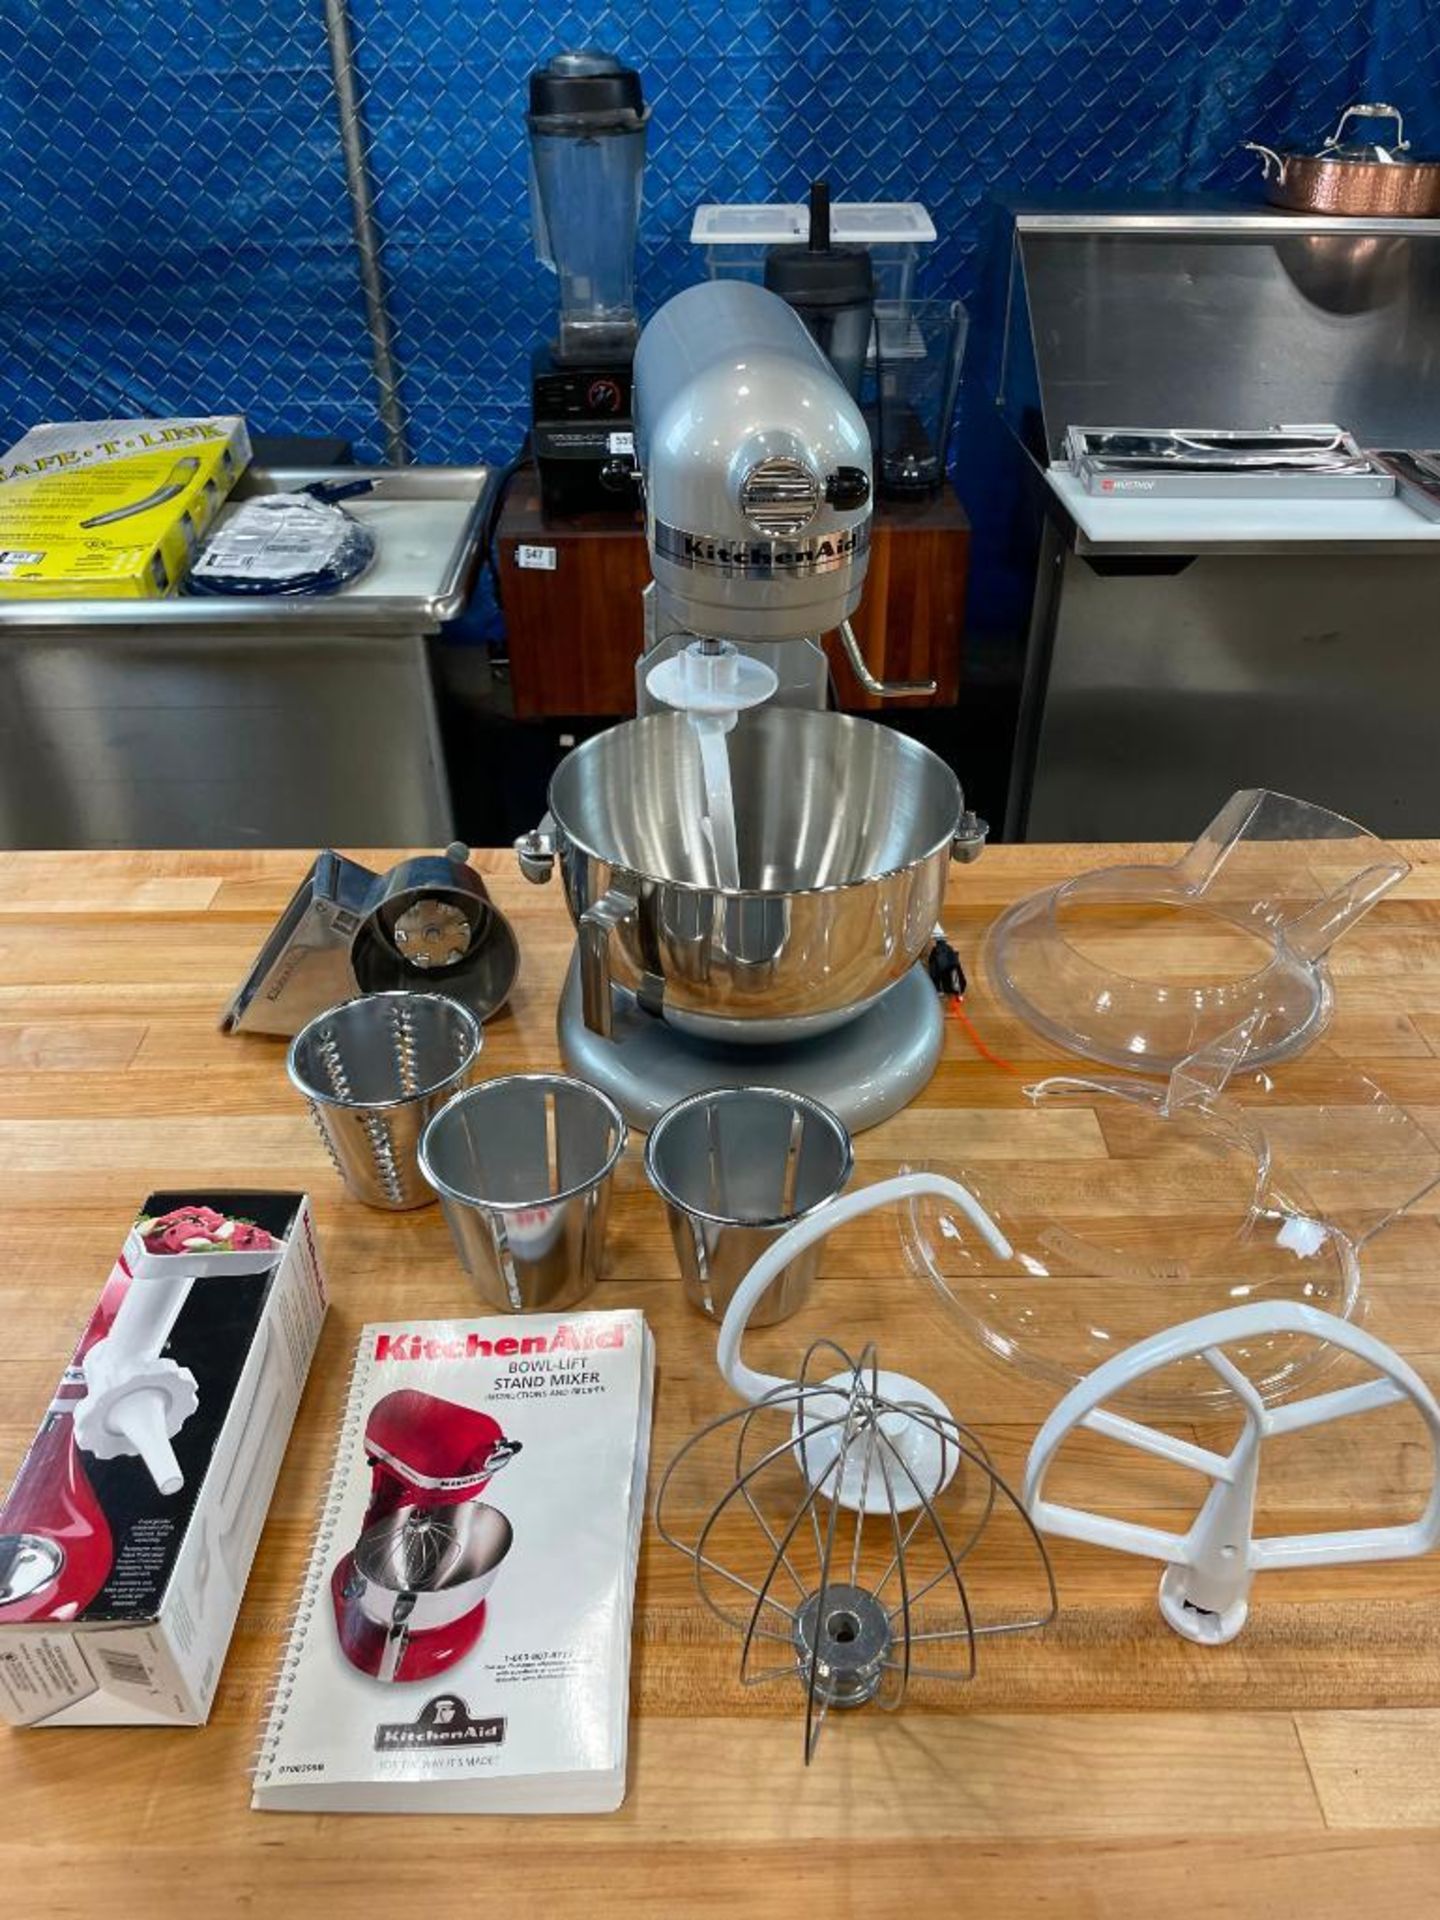 5QT KITCHEN AID DELUXE MIXER WITH ACCESSORIES - Image 4 of 4